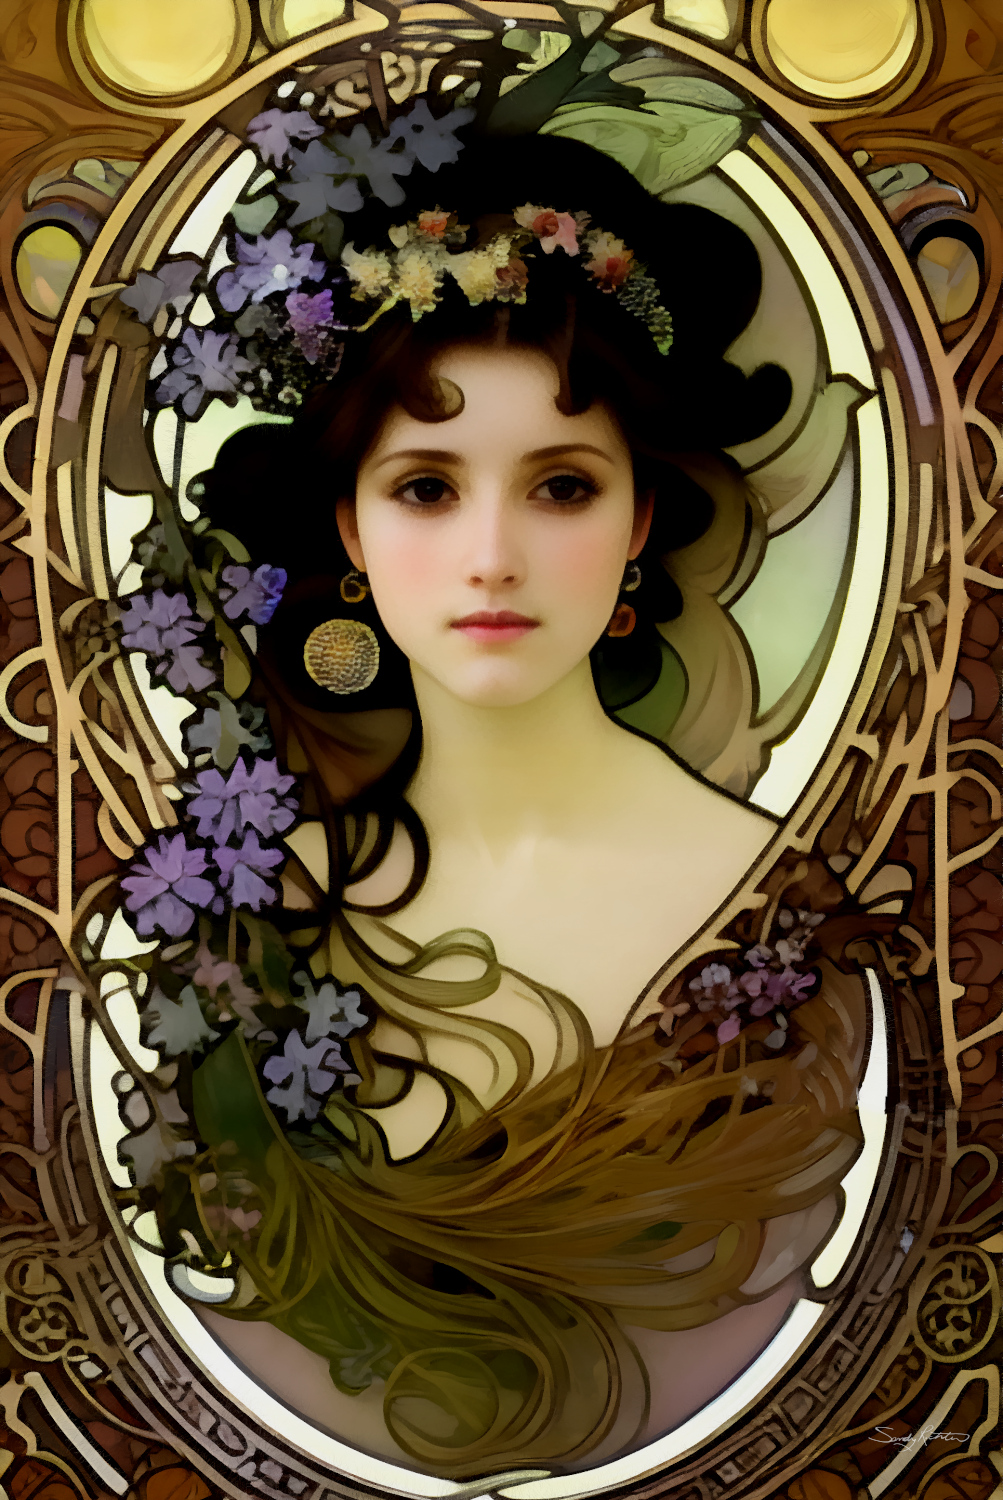 Elegant Mucha Style Portrait of a Beautiful Woman Who needs a time machine when you can bring the beauty of the past to life on canvas? 